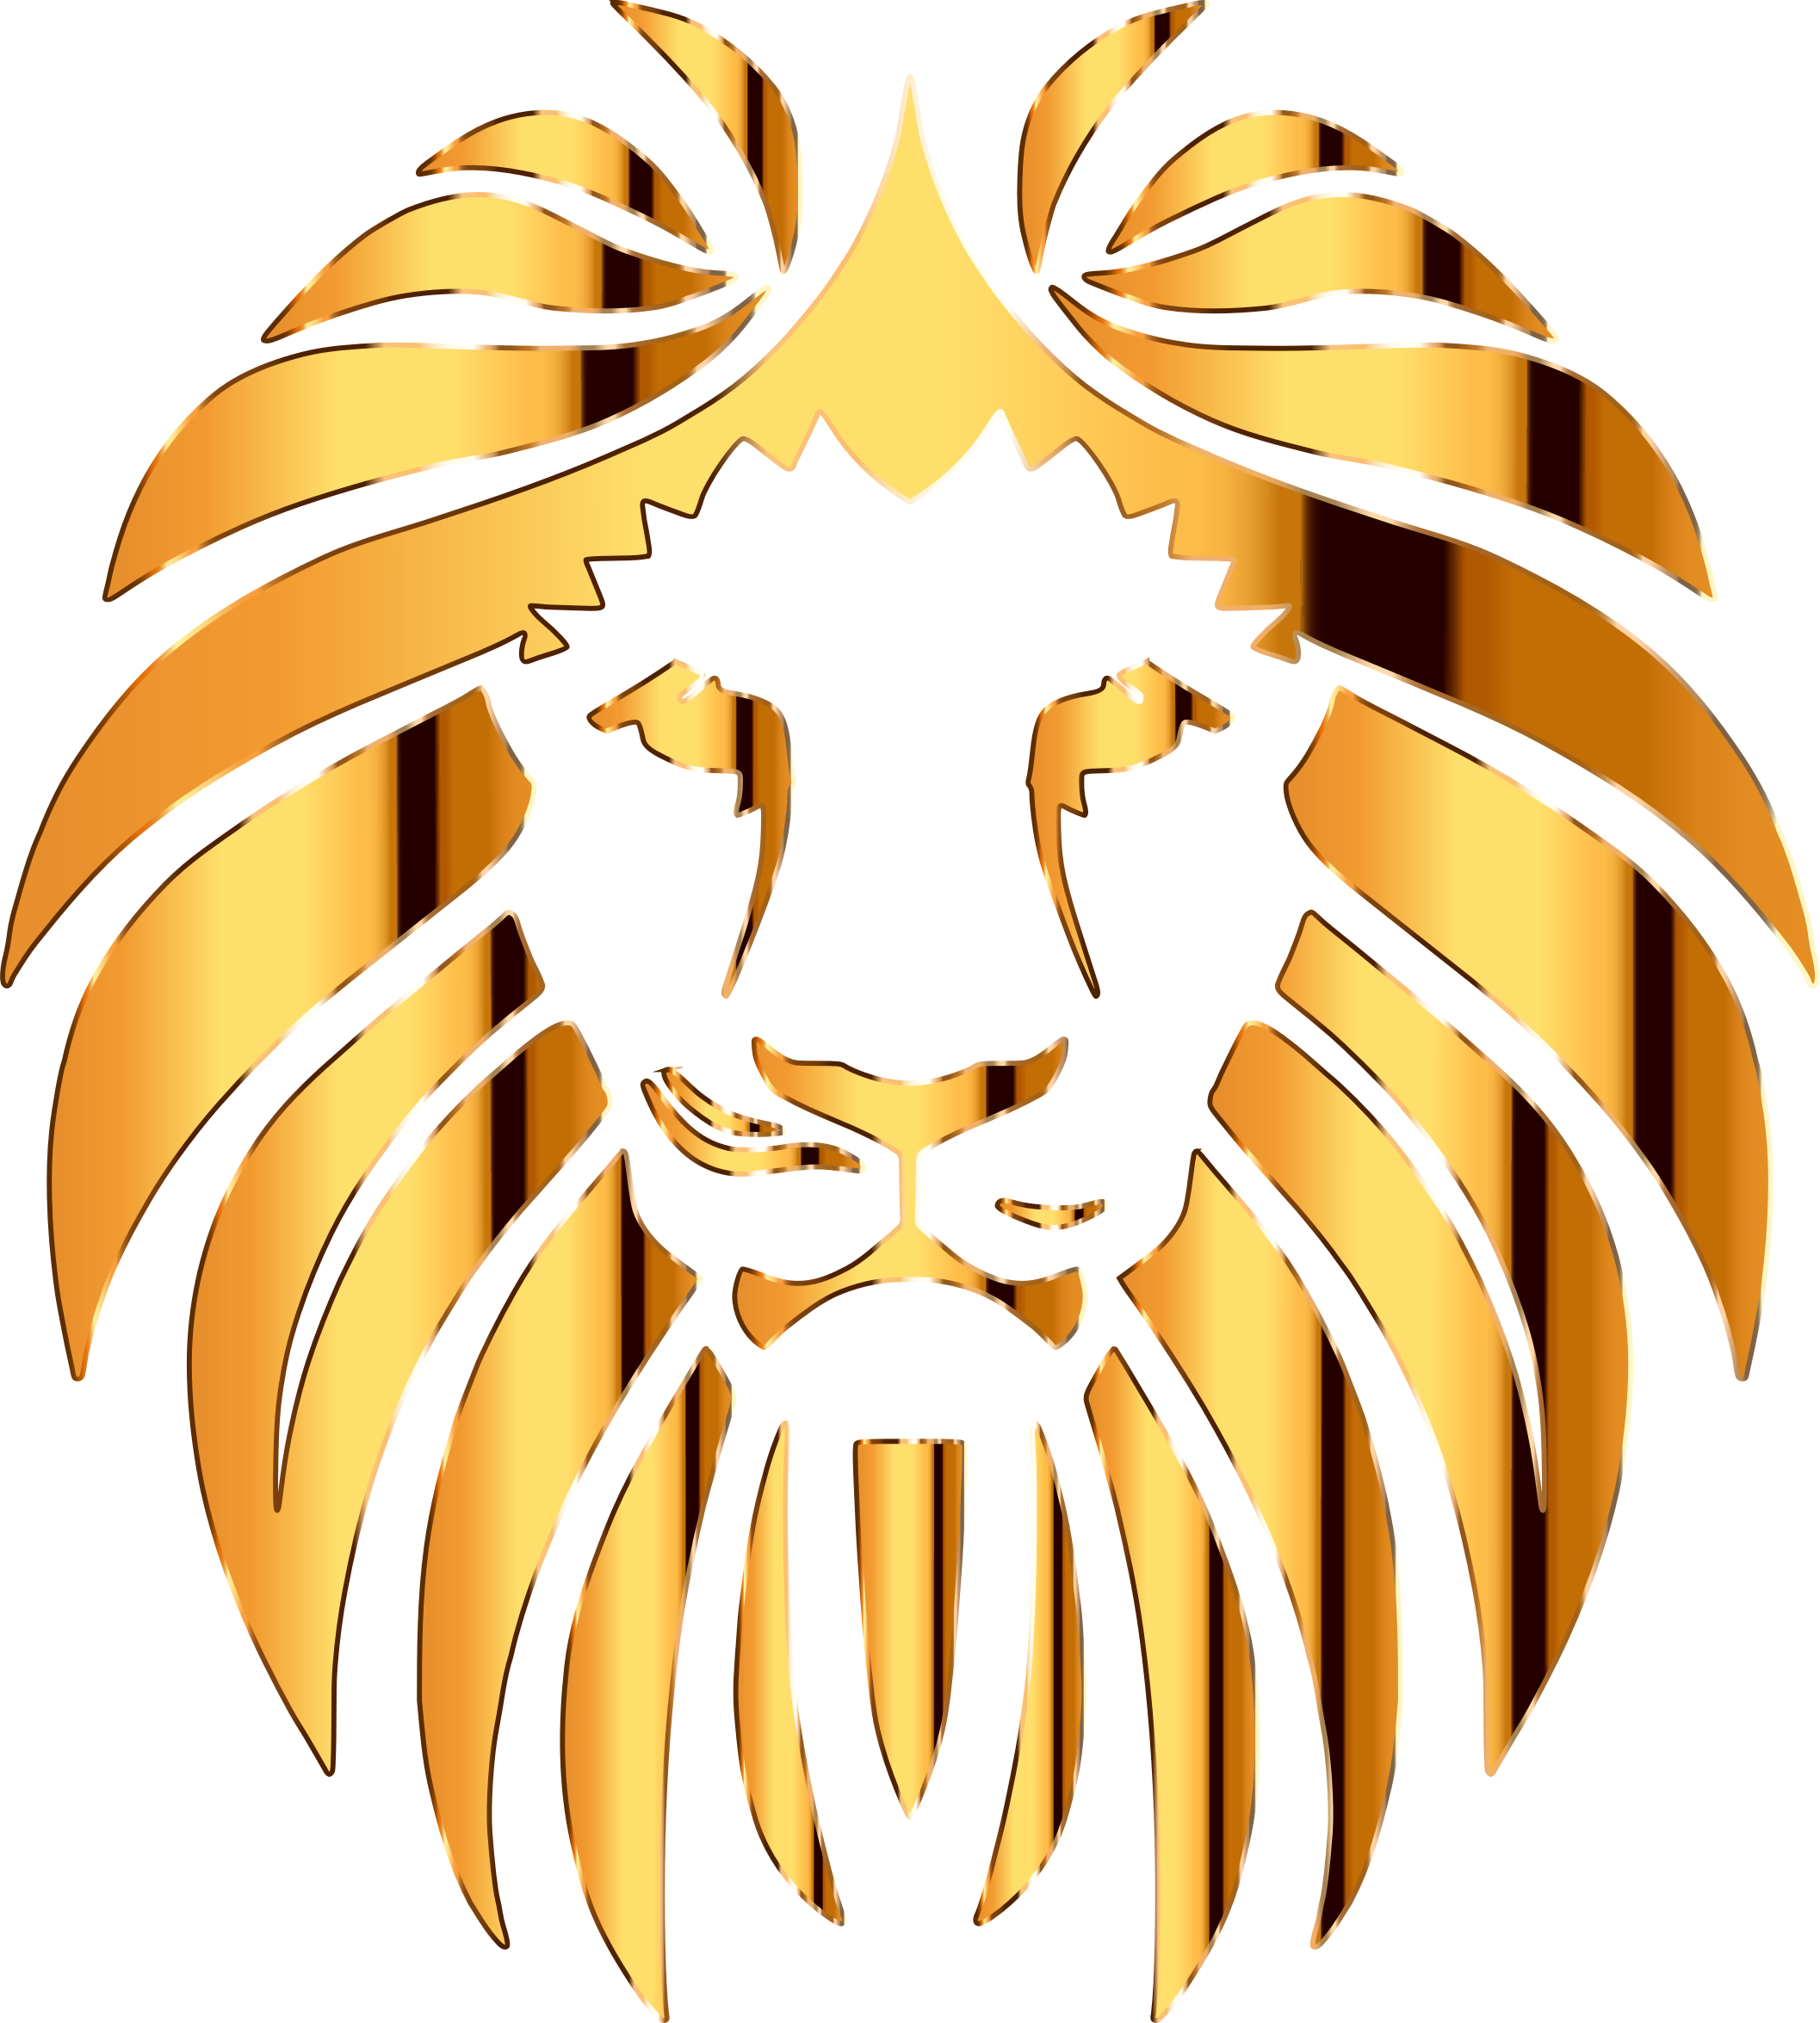 32+ Gold Lion Logo With Crown PNG - image analysis online